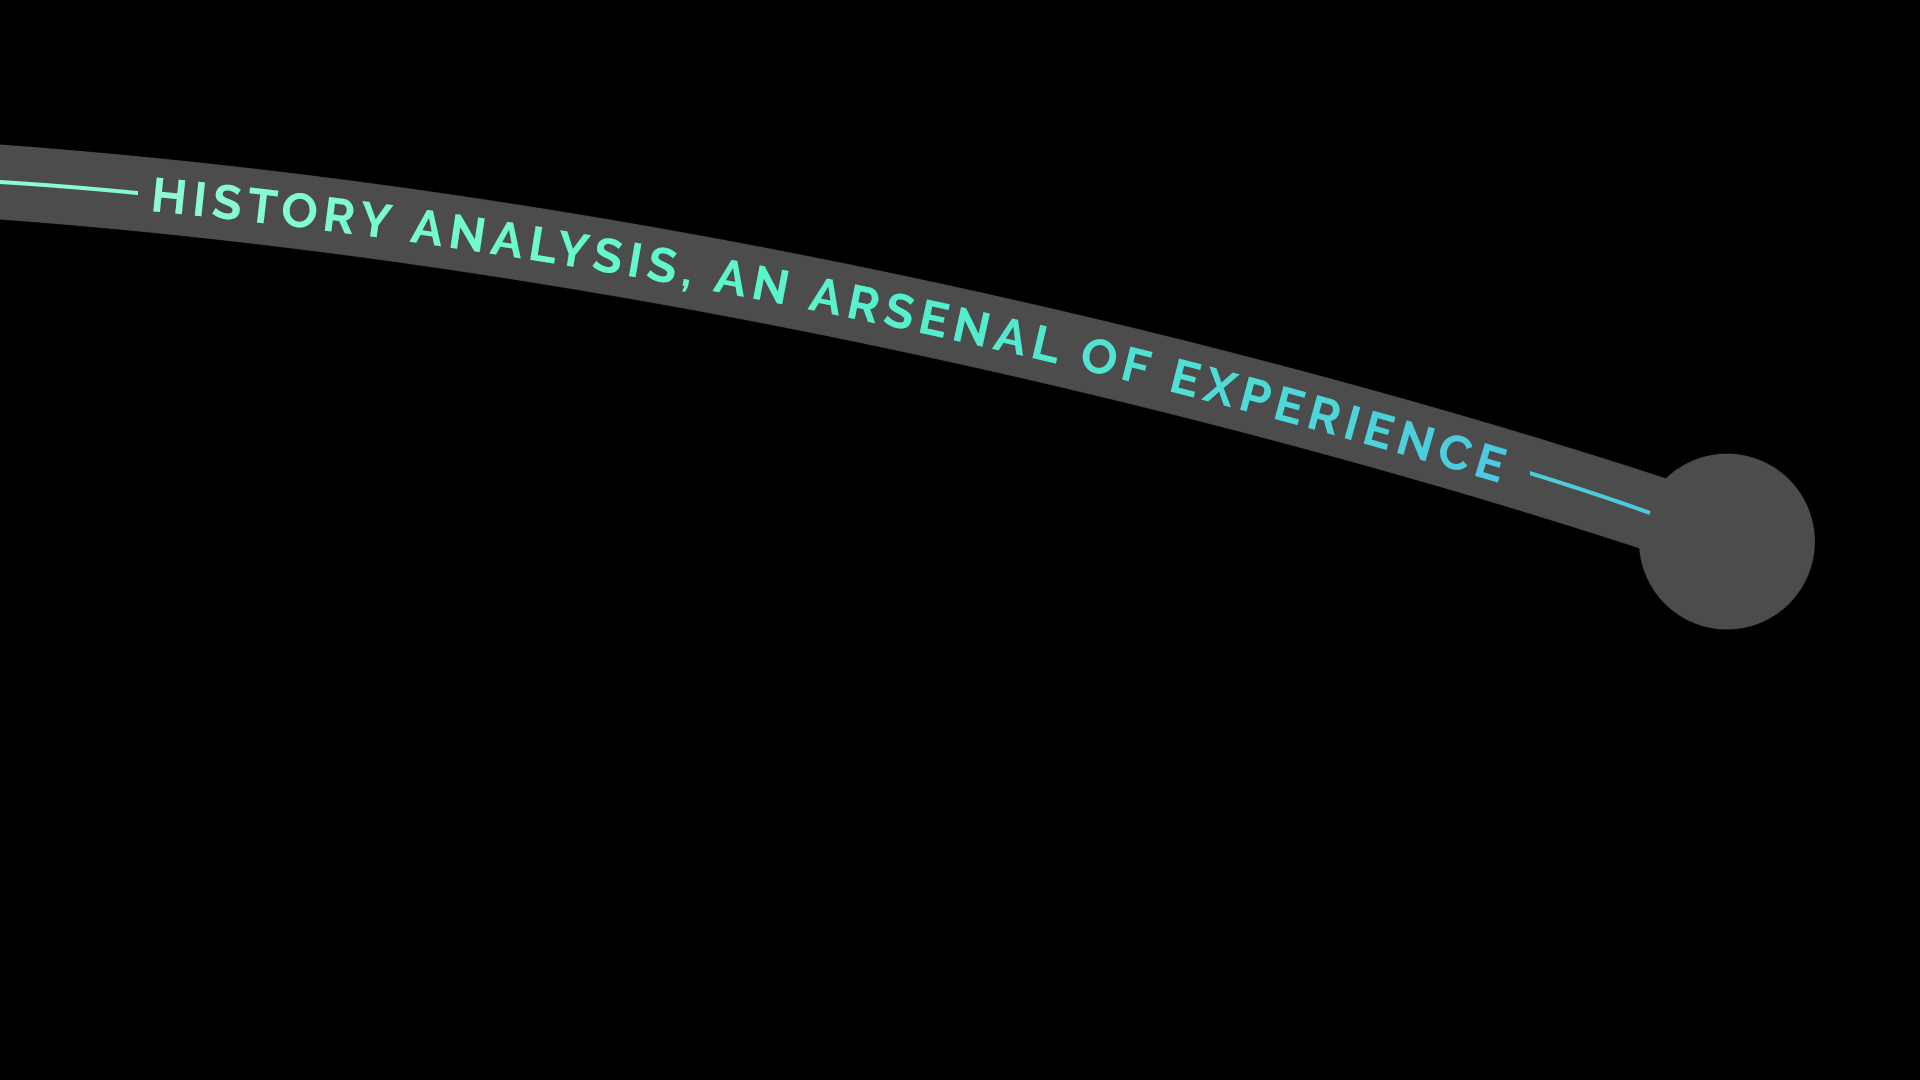 History analysis, an arsenal of experience